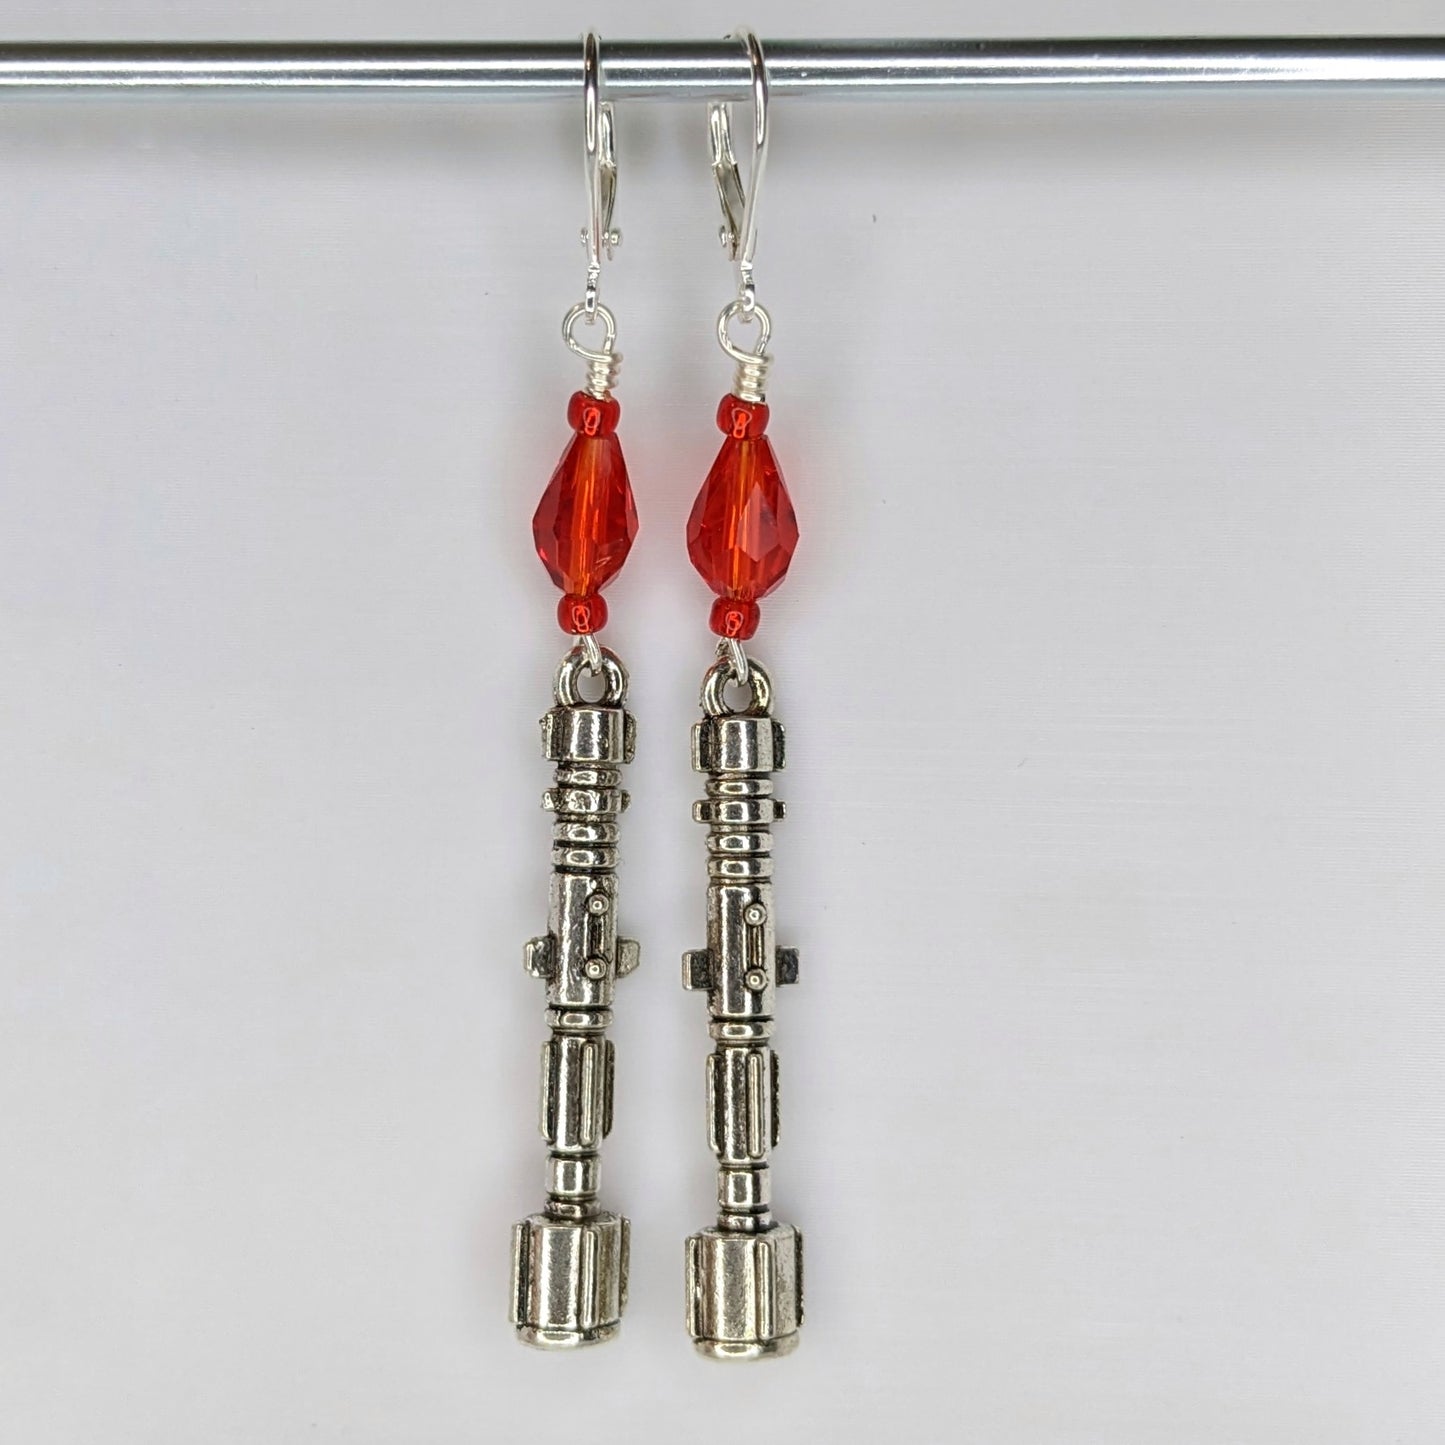 Lightsaber Earrings & Stitch Markers